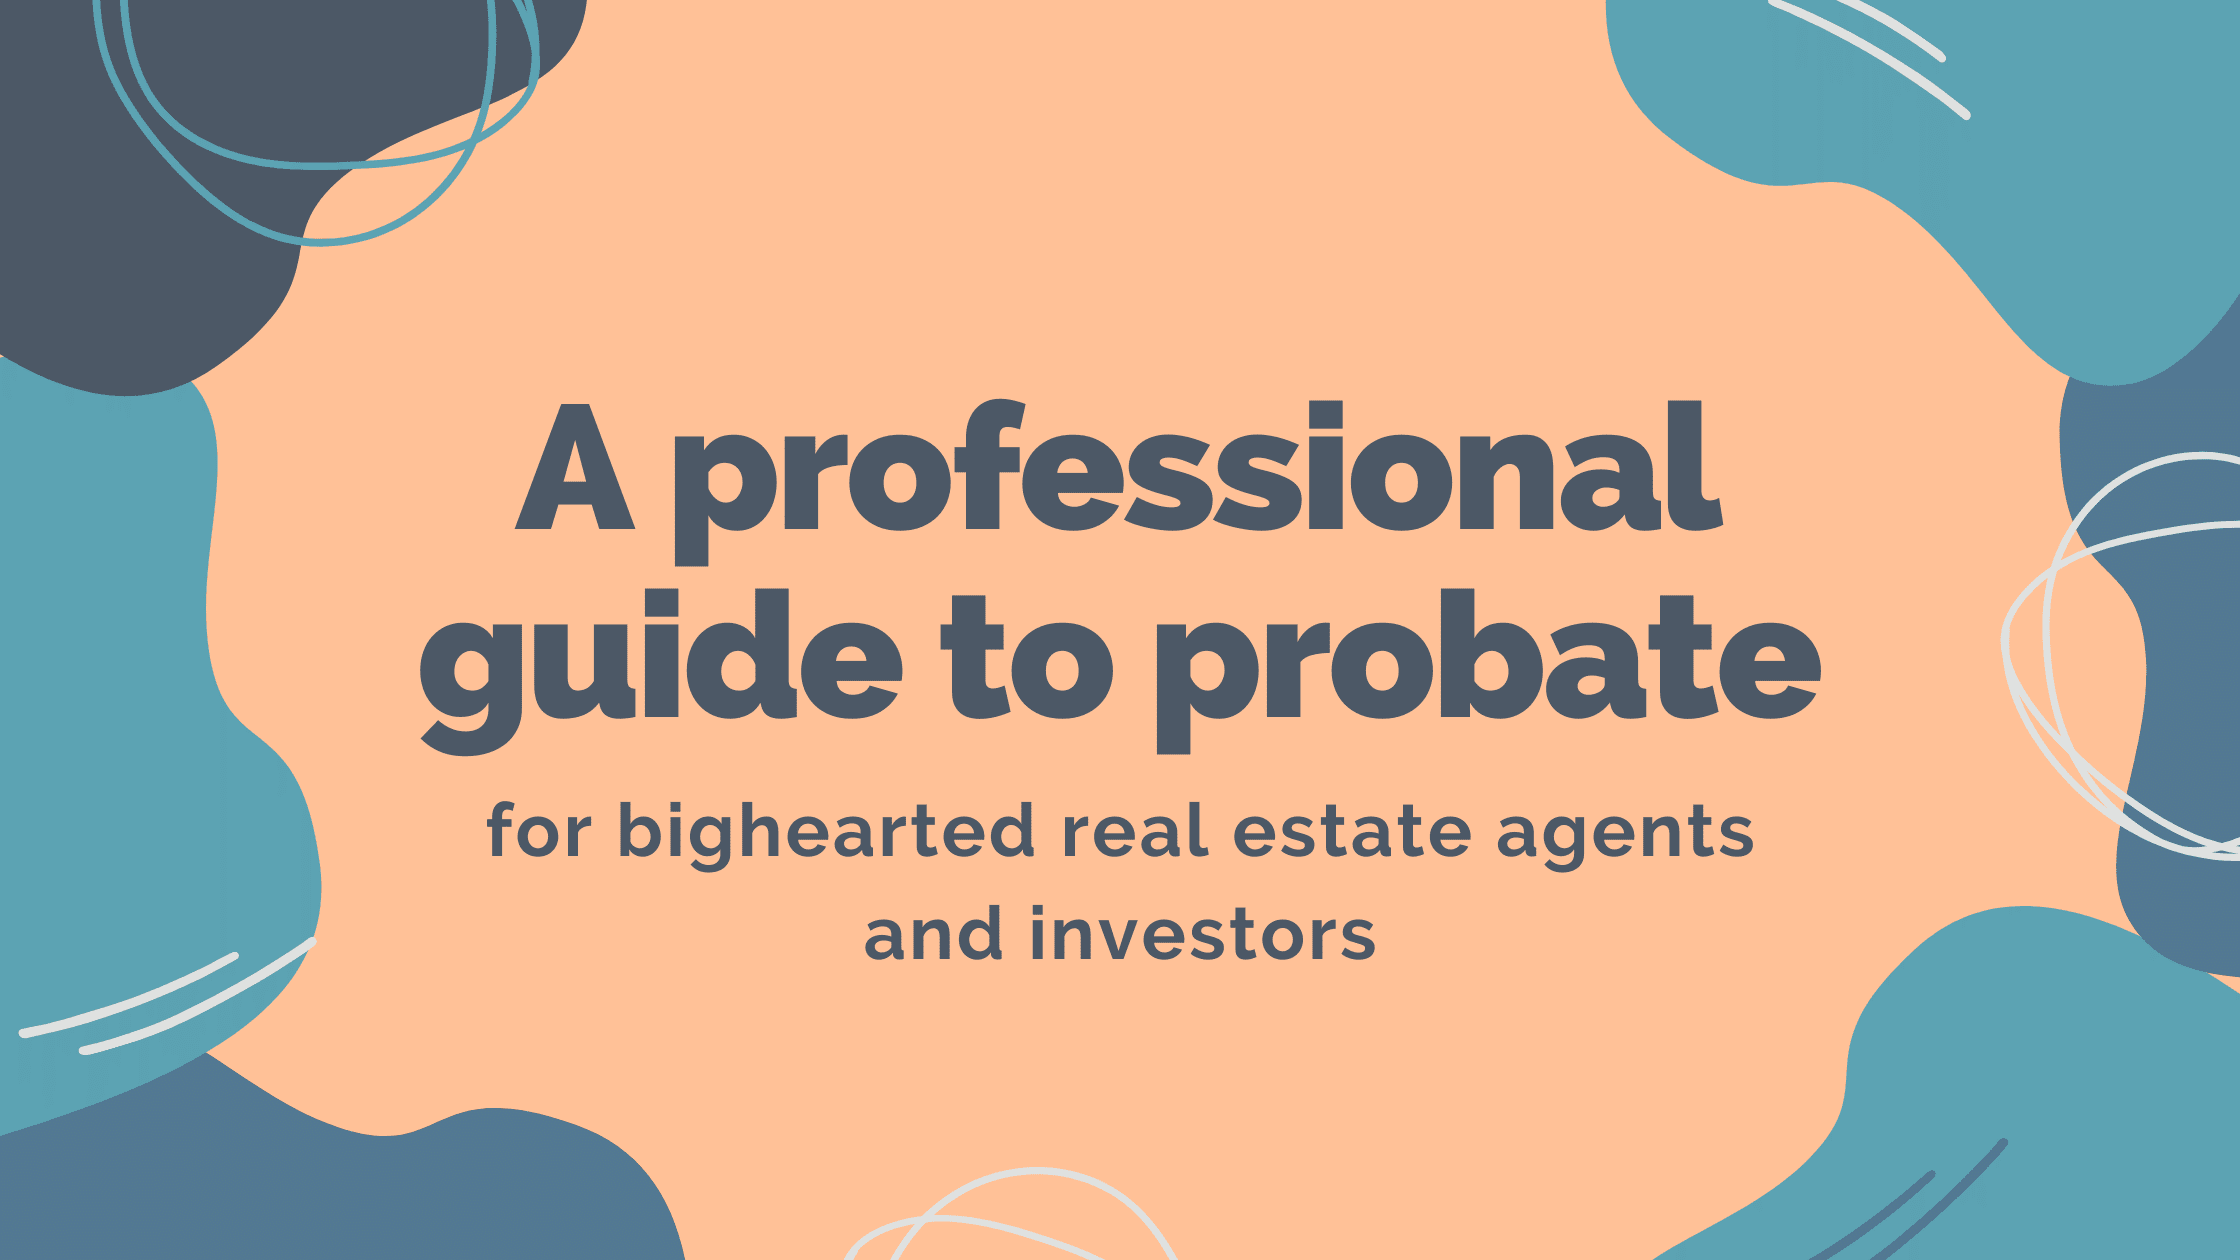 Featured image for “A guide to probate real estate for big-hearted real estate agents and investors”